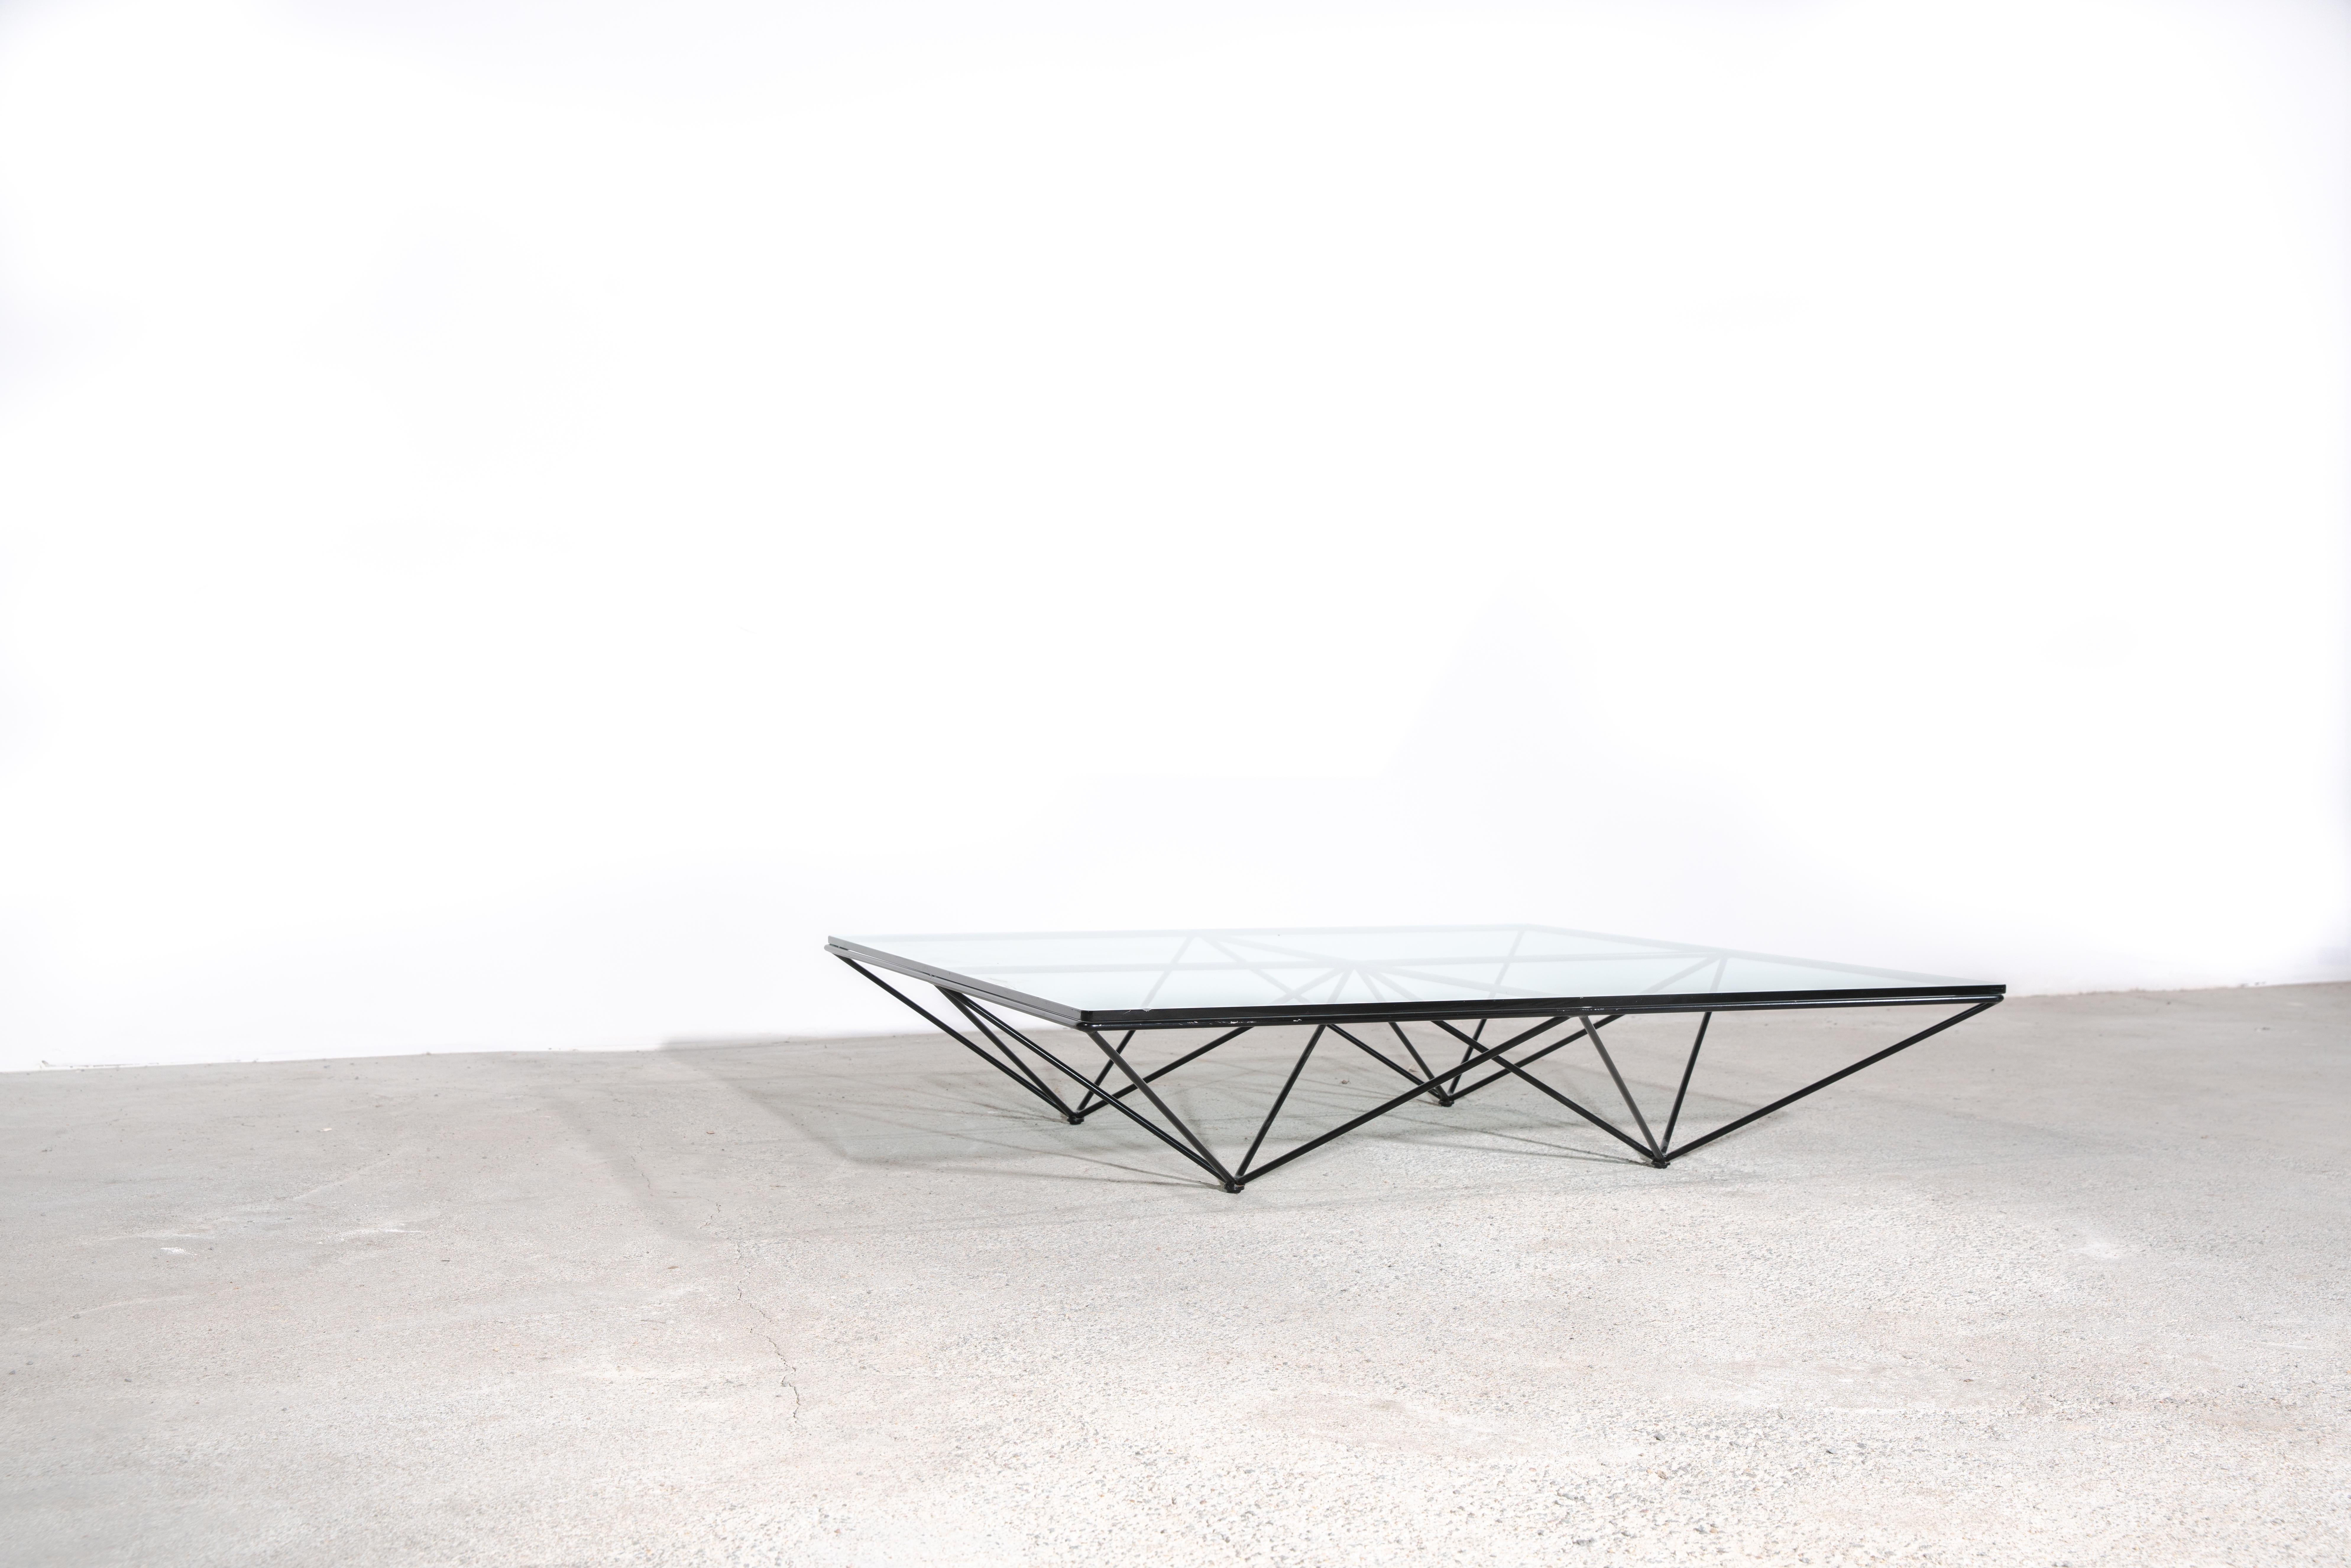 Alanda by Paolo Piva is a coffee table produced by C&B, today B&B Italia, in 1981. Its design follows a precise architectural construction and is endowed with a characteristic formal composition obtained through the assembly of pyramidal